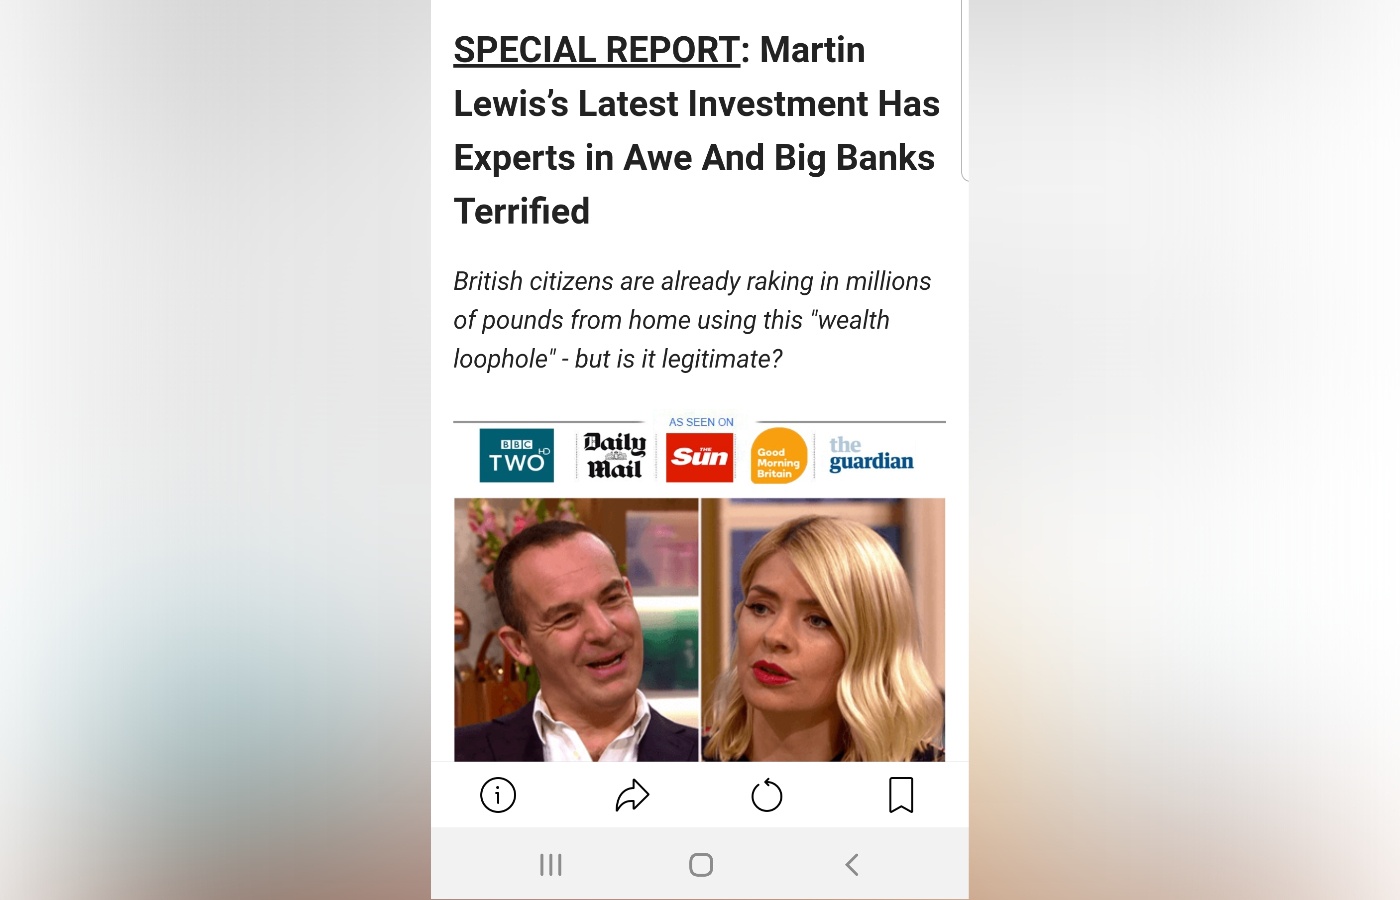 The Martin Lewis fake ad which Jennifer discovered on Facebook.